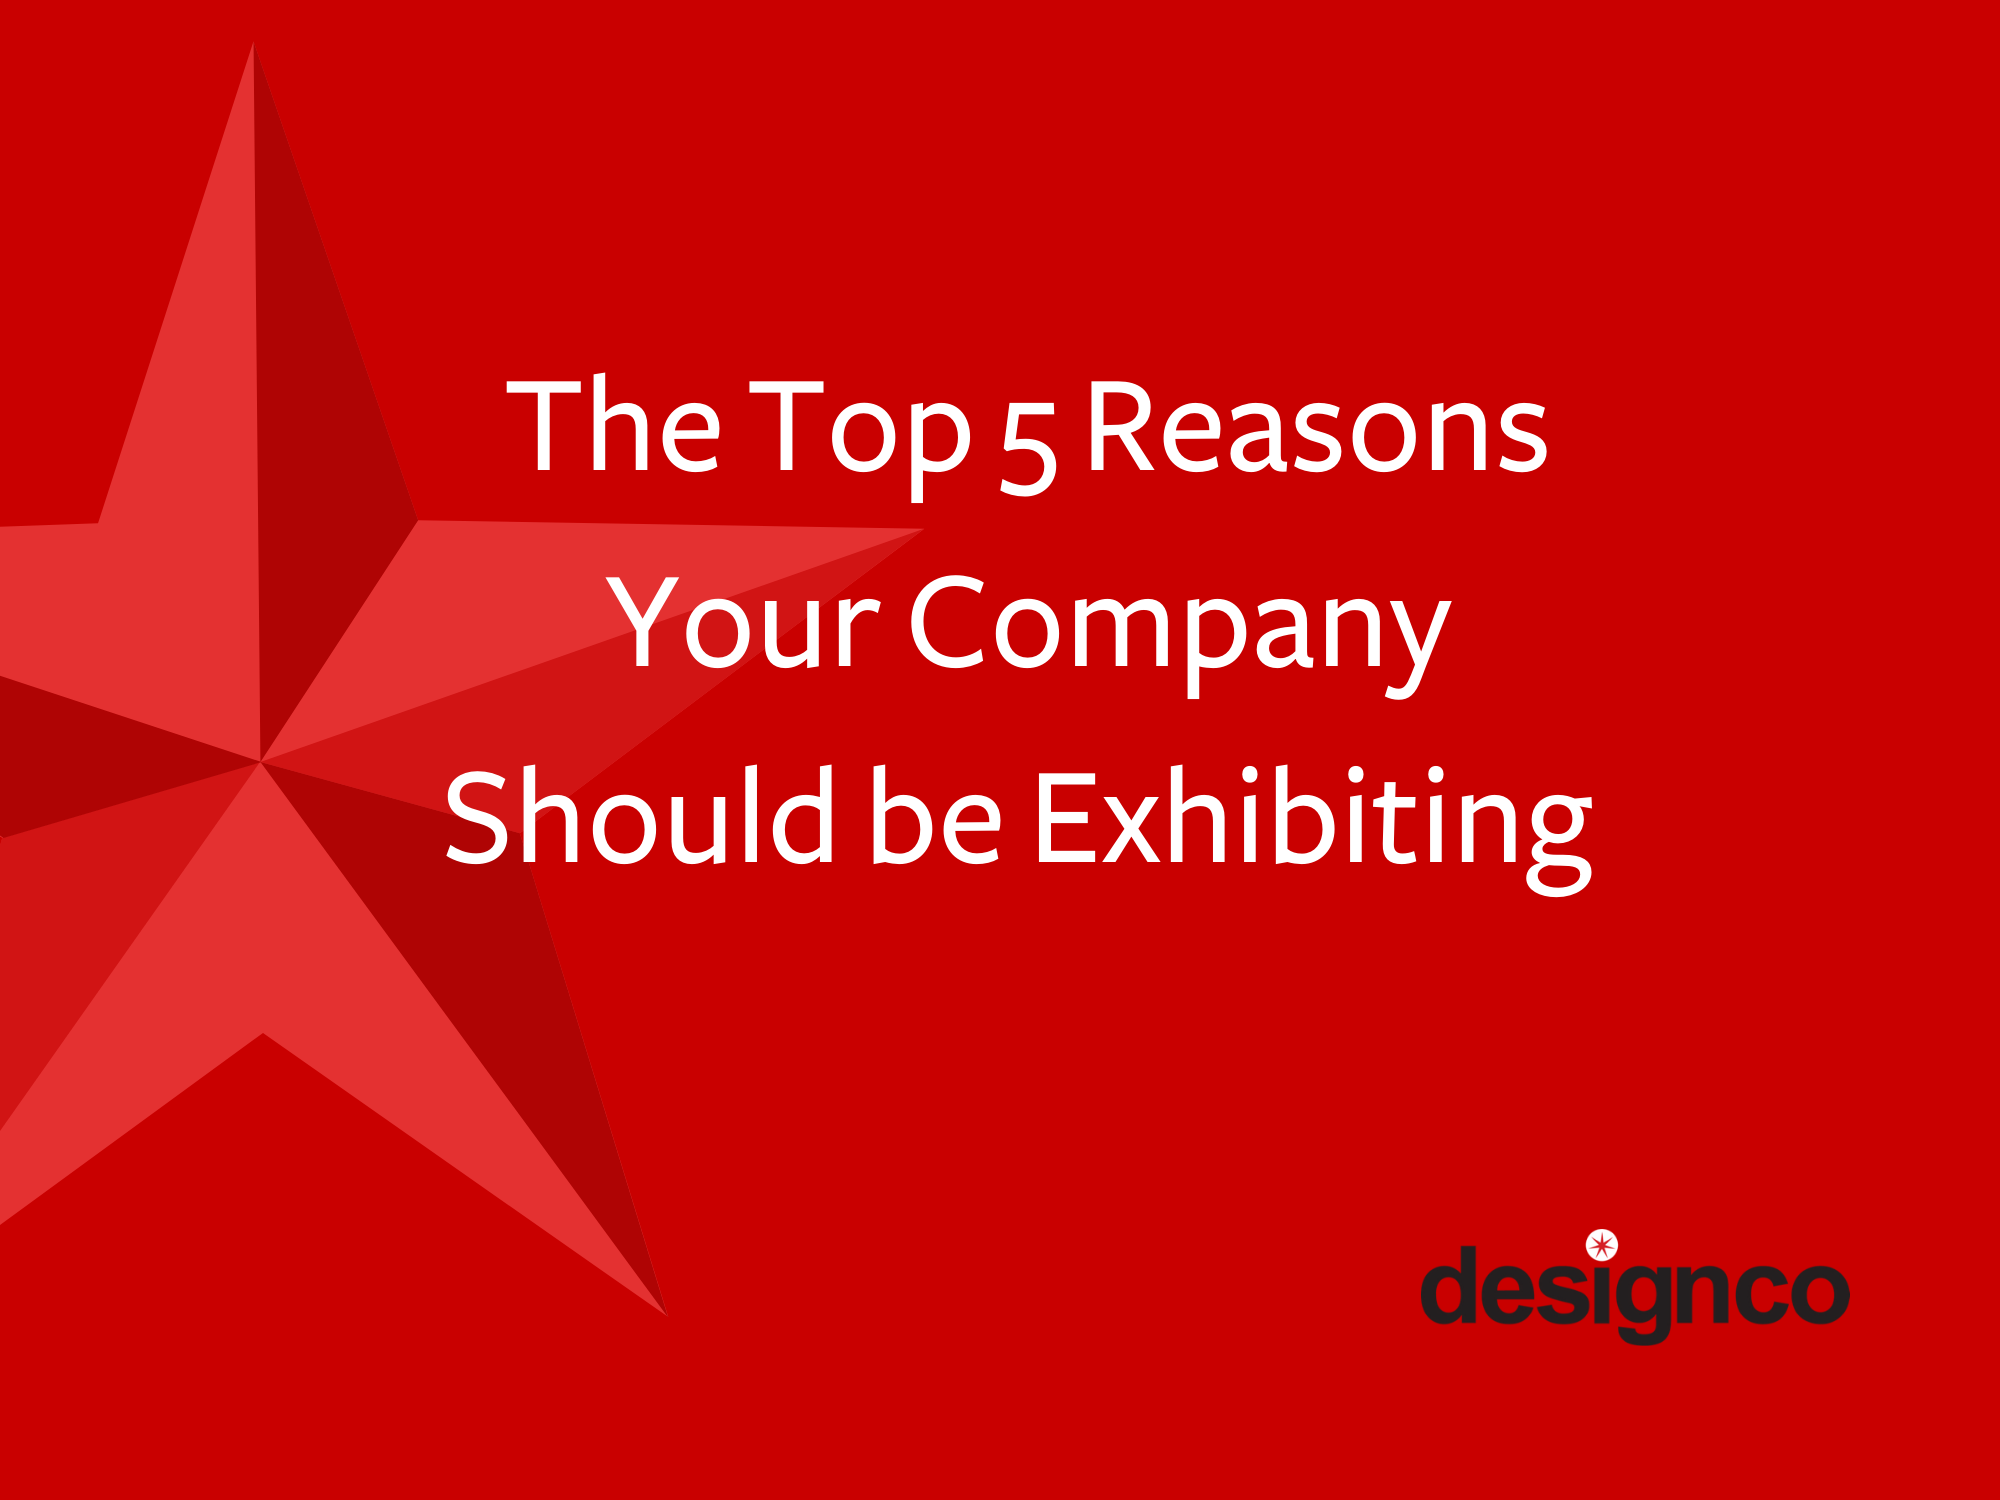 The Top 5 Reasons Your Company Should be Exhibiting headline image